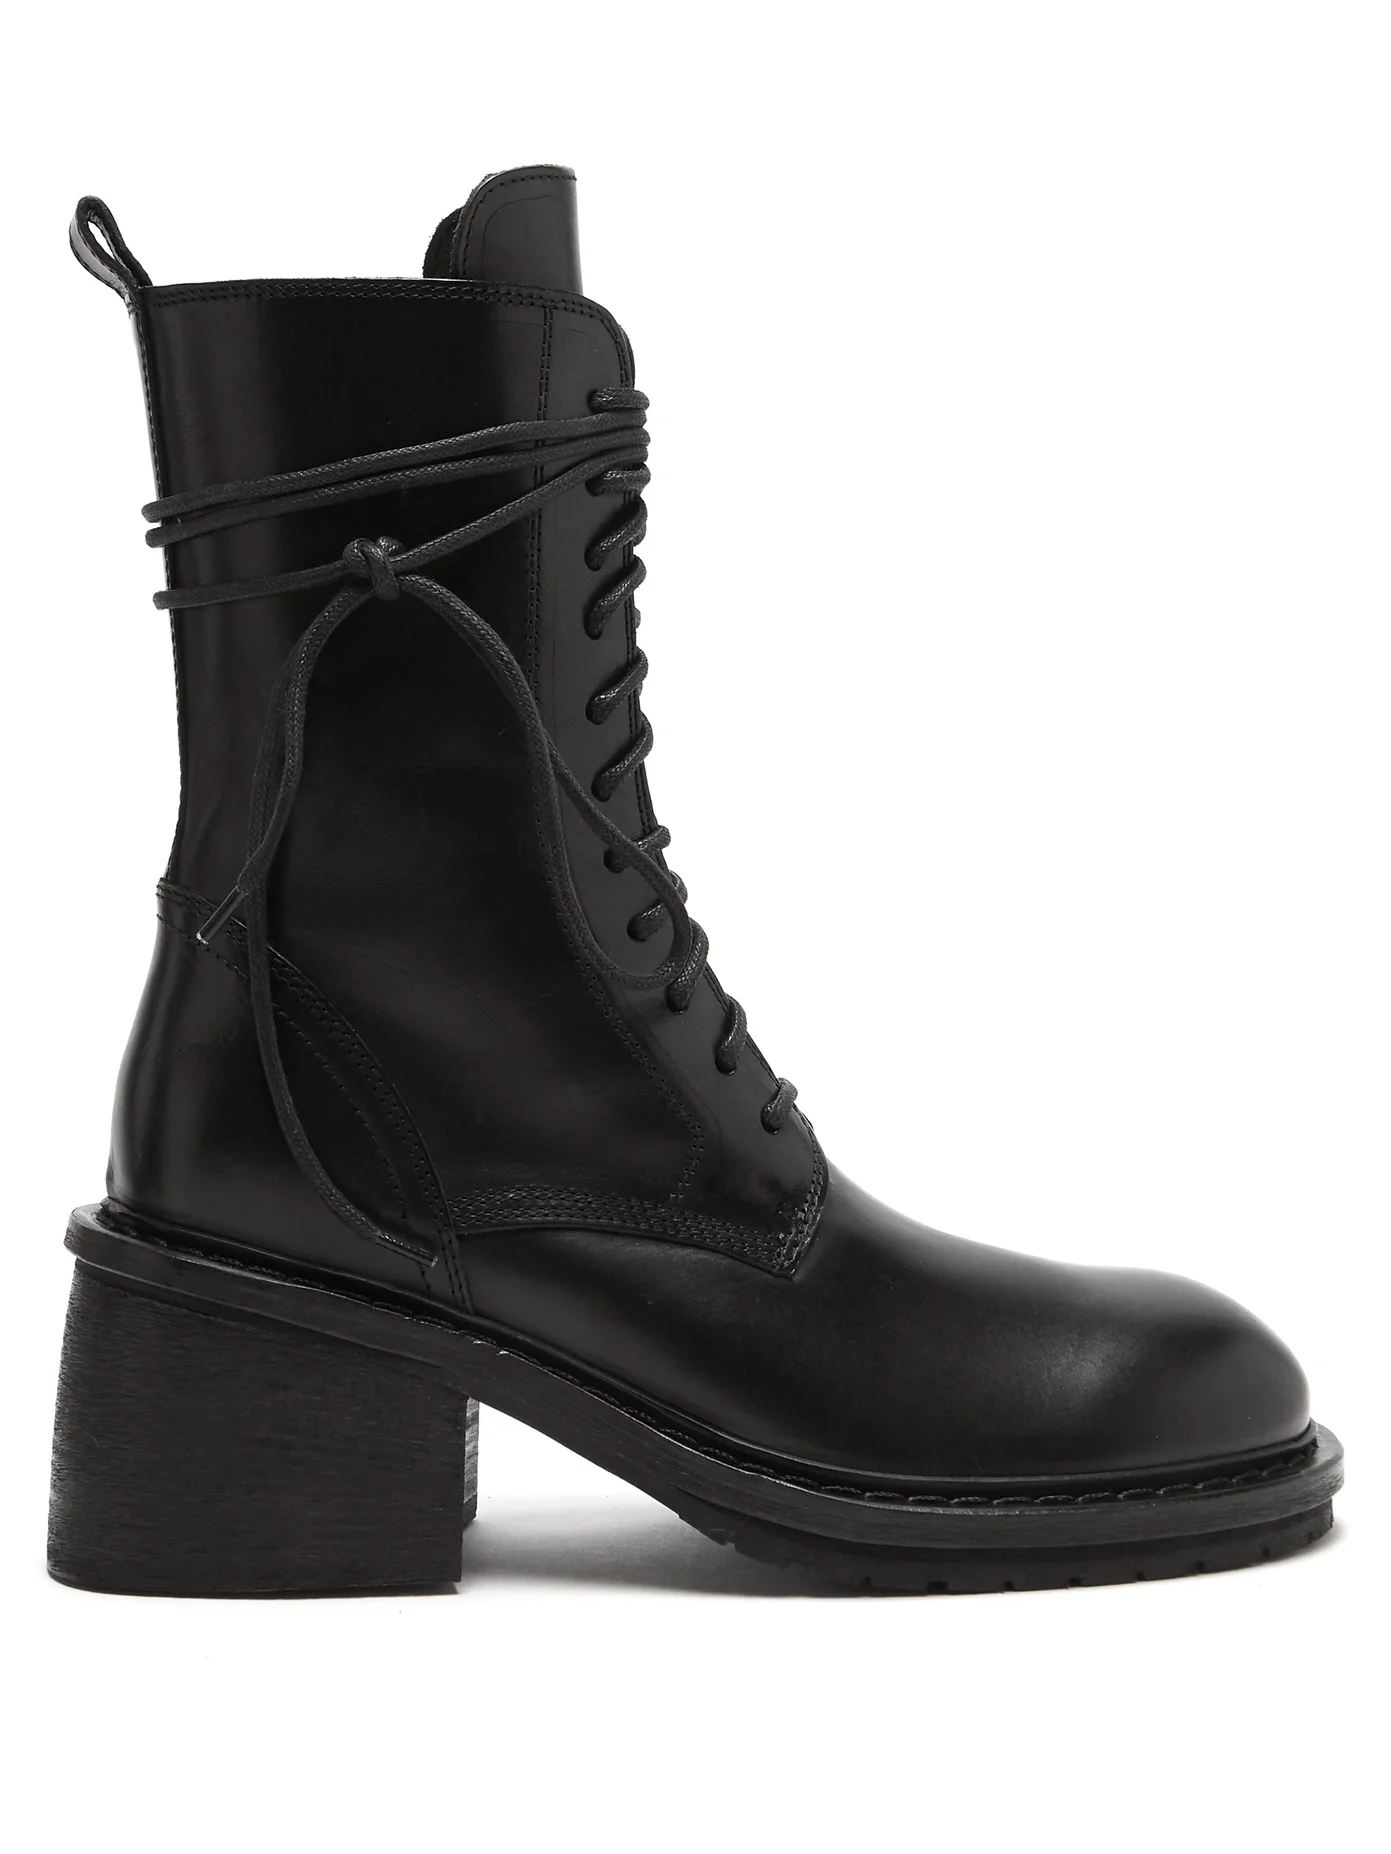 We Can’t Get Enough Of These Extra Sturdy Combat Boots